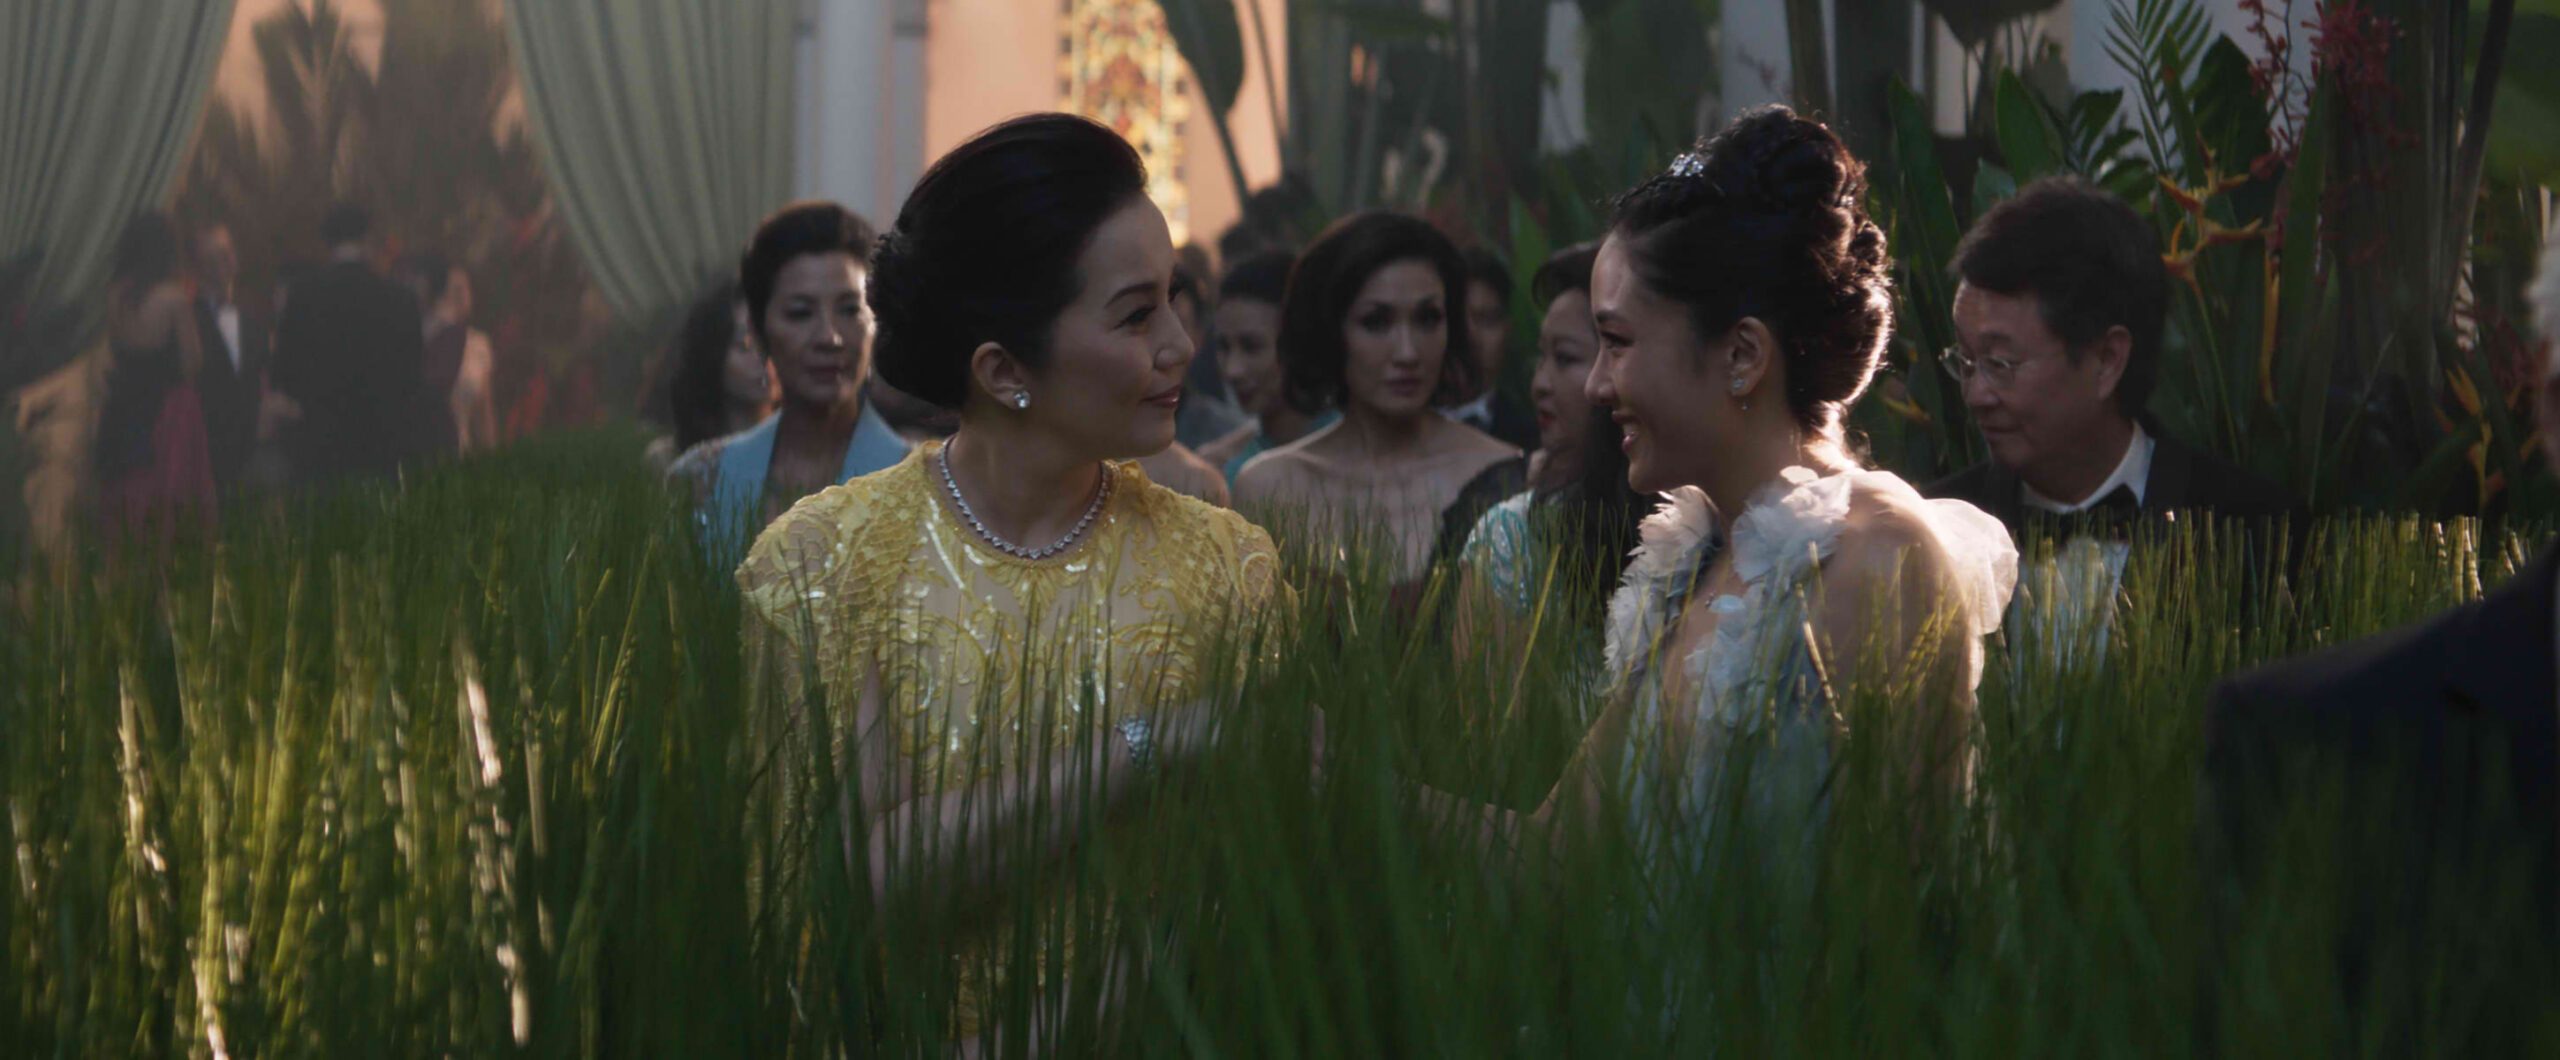 ‘Crazy Rich Asians’ had the biggest opening for a foreign rom-com in PH